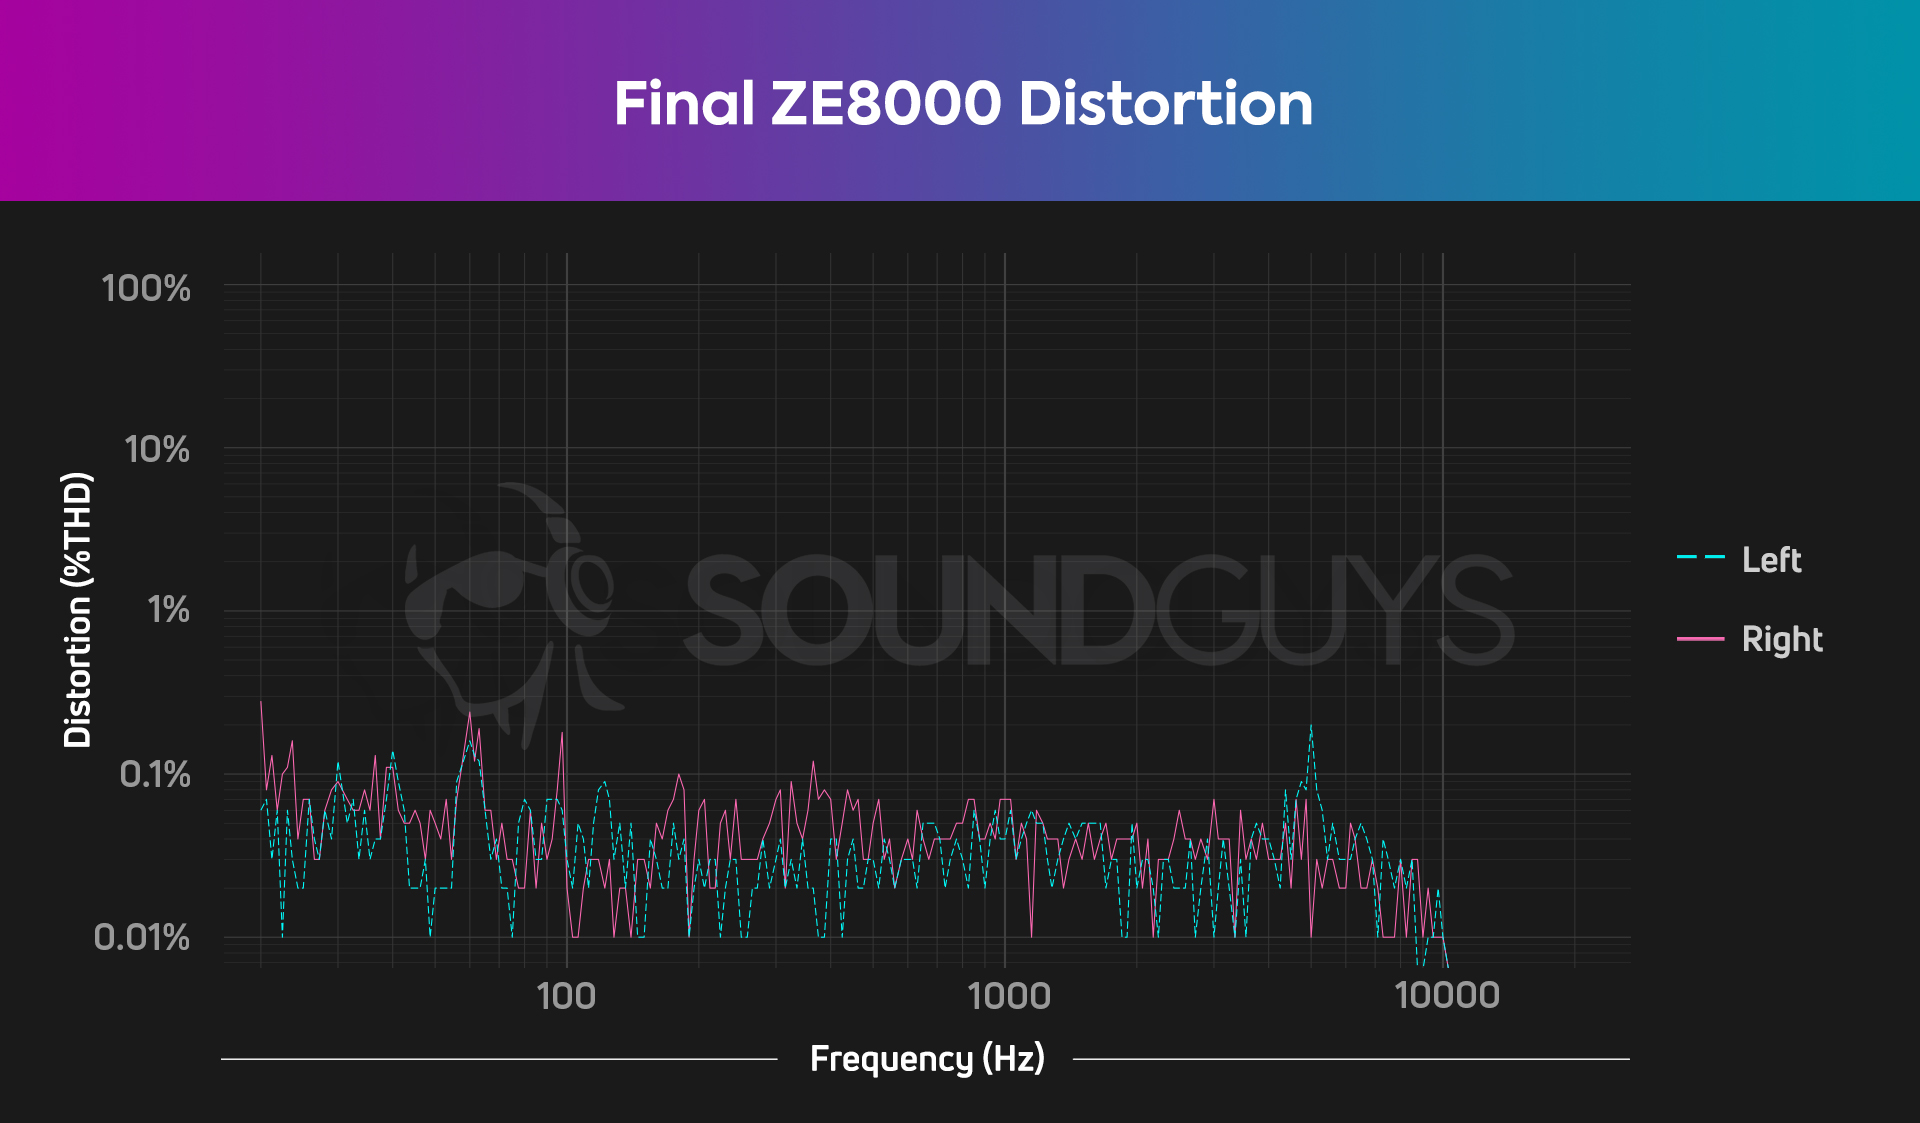 A chart shows the THD distortion of the Final ZE8000.